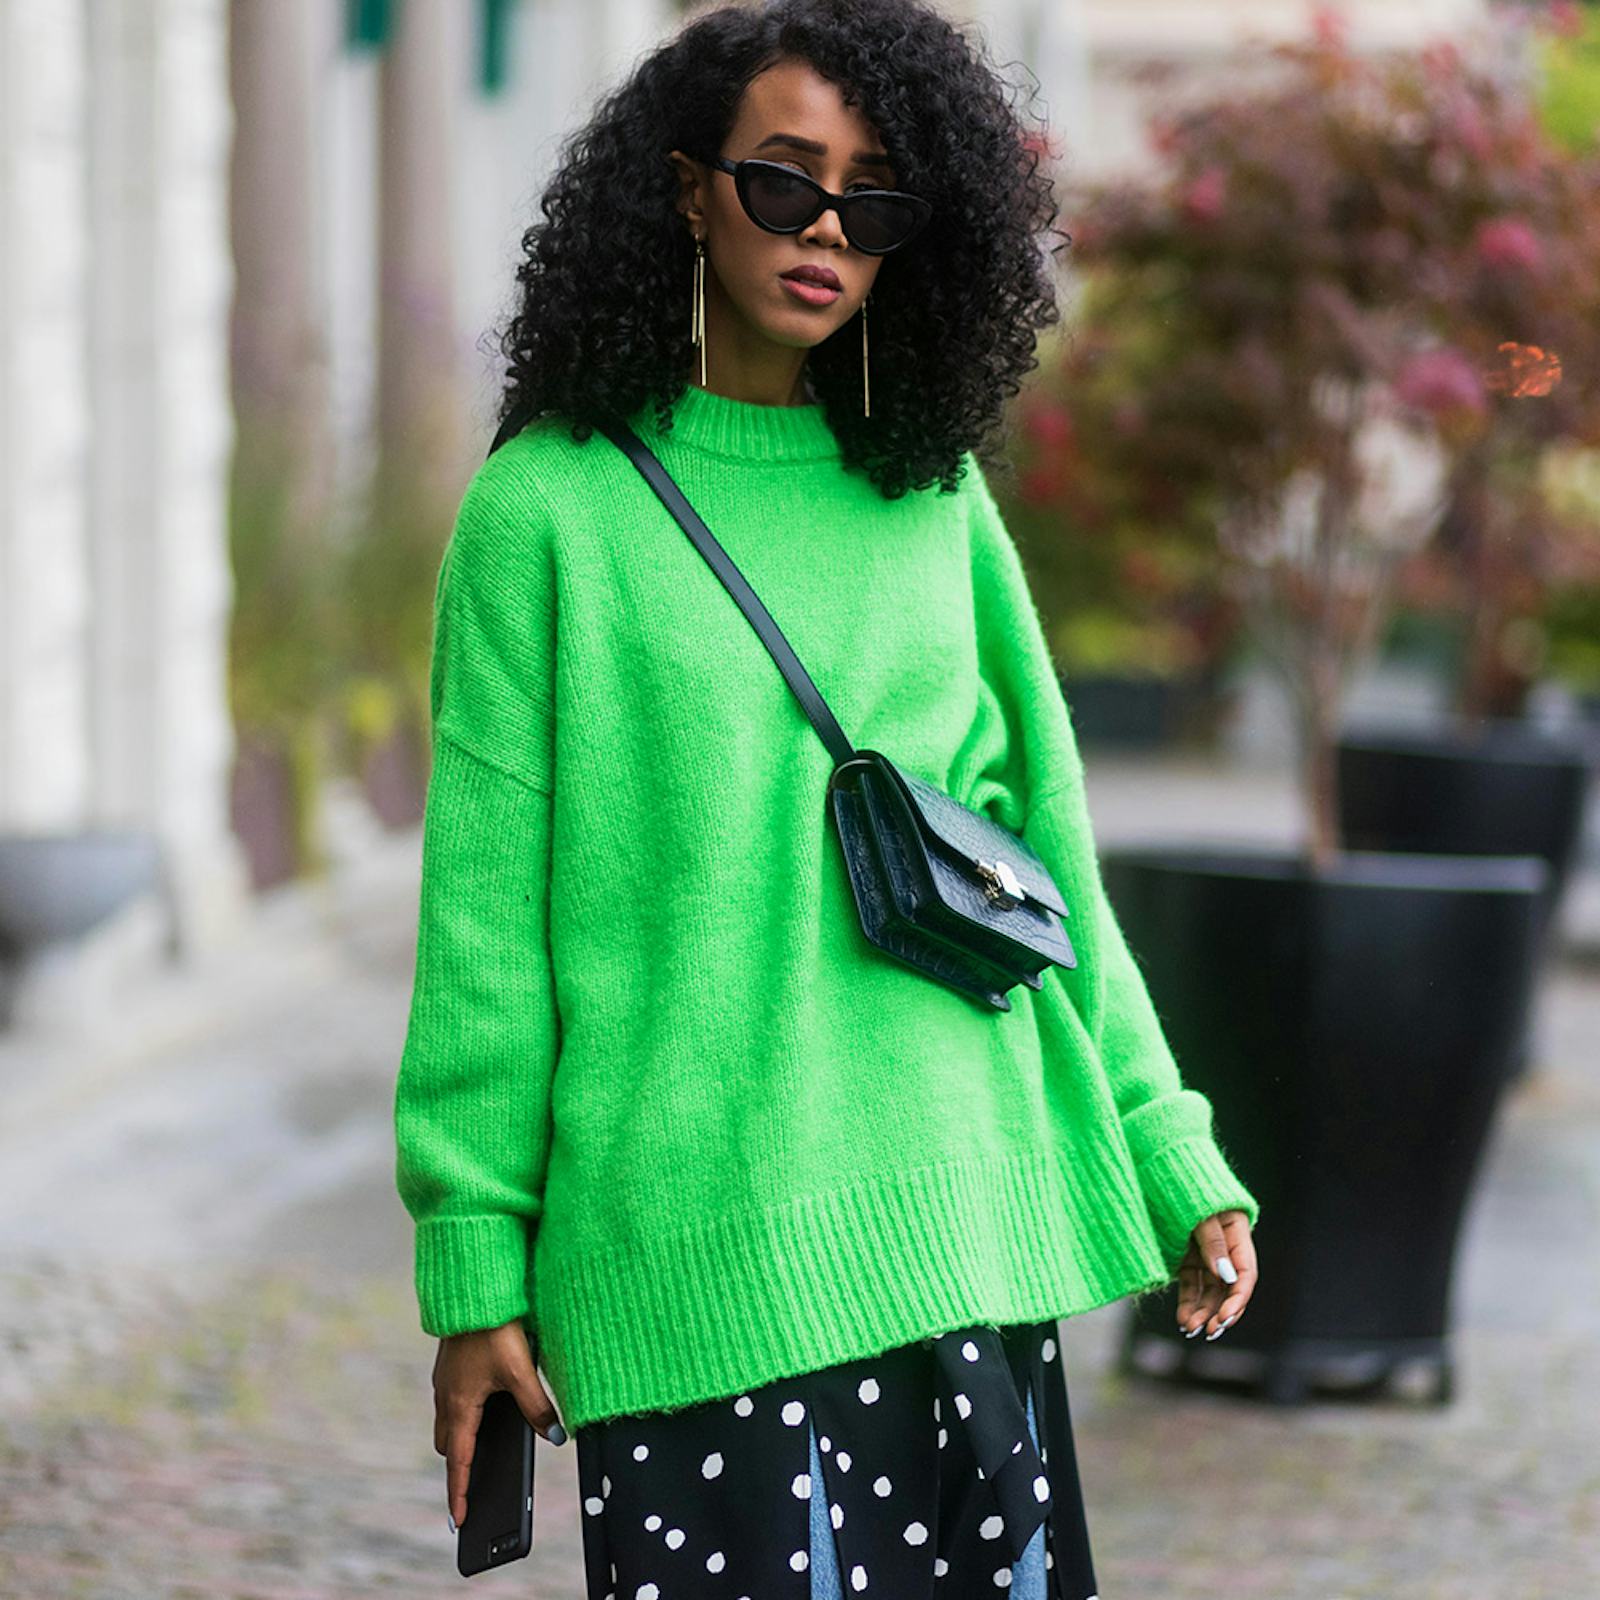 This Sweater Trend Is Exactly What We Need Right Now